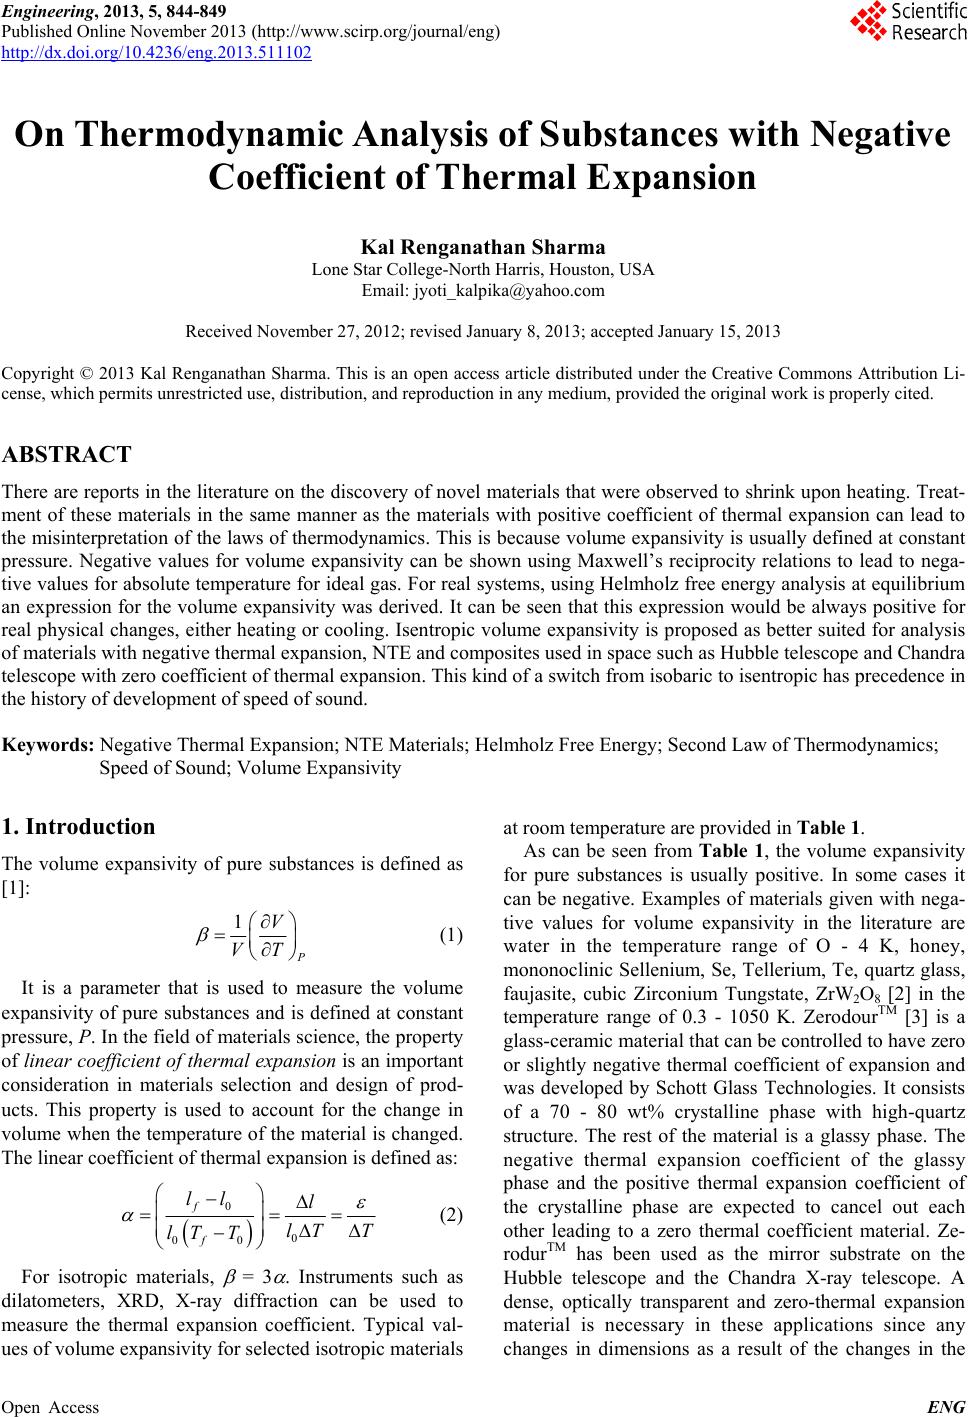 On Thermodynamic Analysis Of Substances With Negative Coefficient Of Thermal Expansion